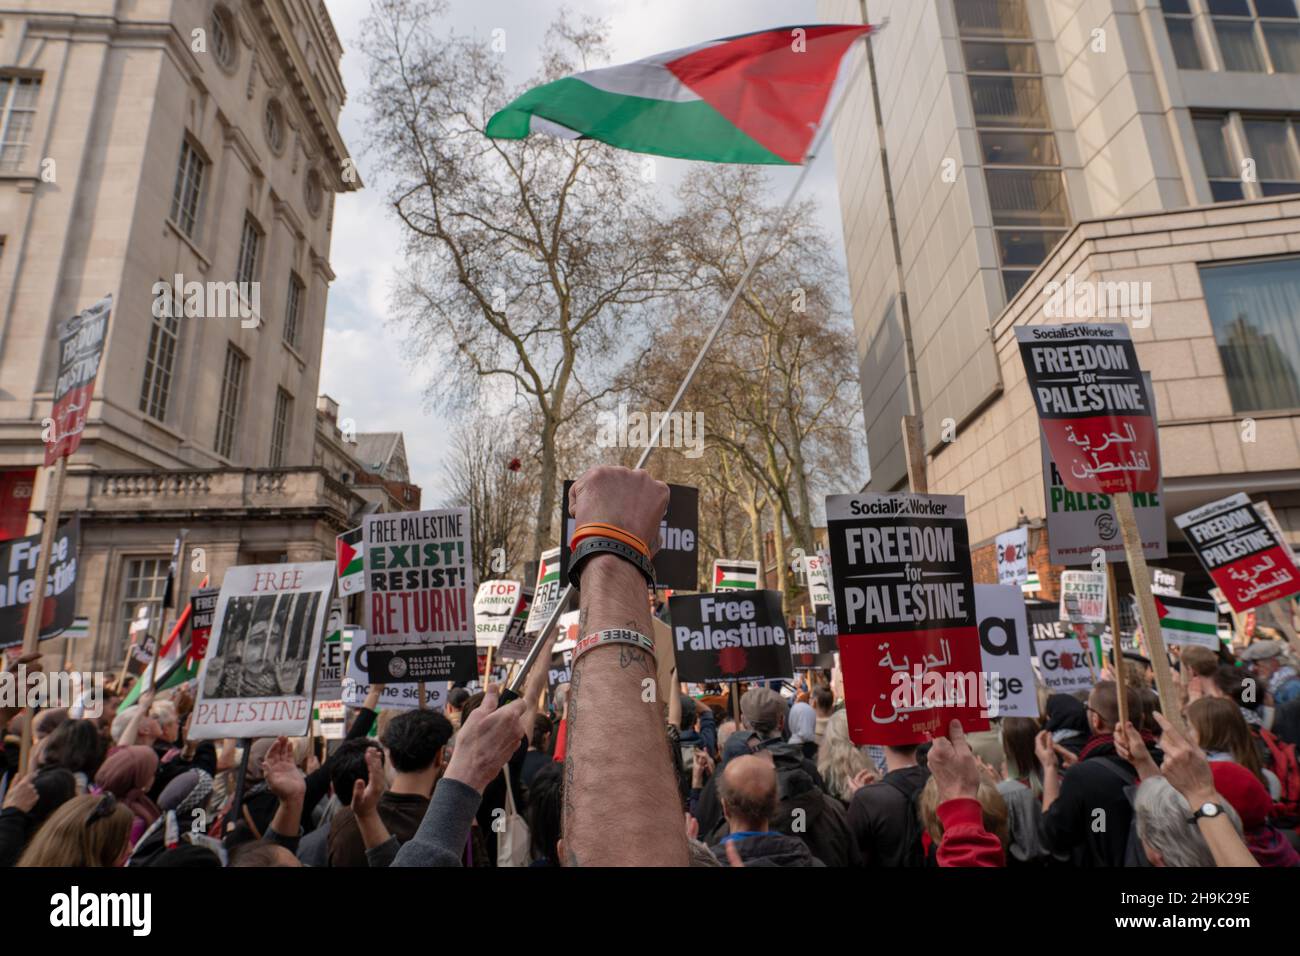 A pro-Palestine demonstration (Exist, Resist Return) outside the Israel embassy in London. Photo date: Saturday, March 30, 2019. Photo credit should read: Richard Gray/EMPICS Stock Photo